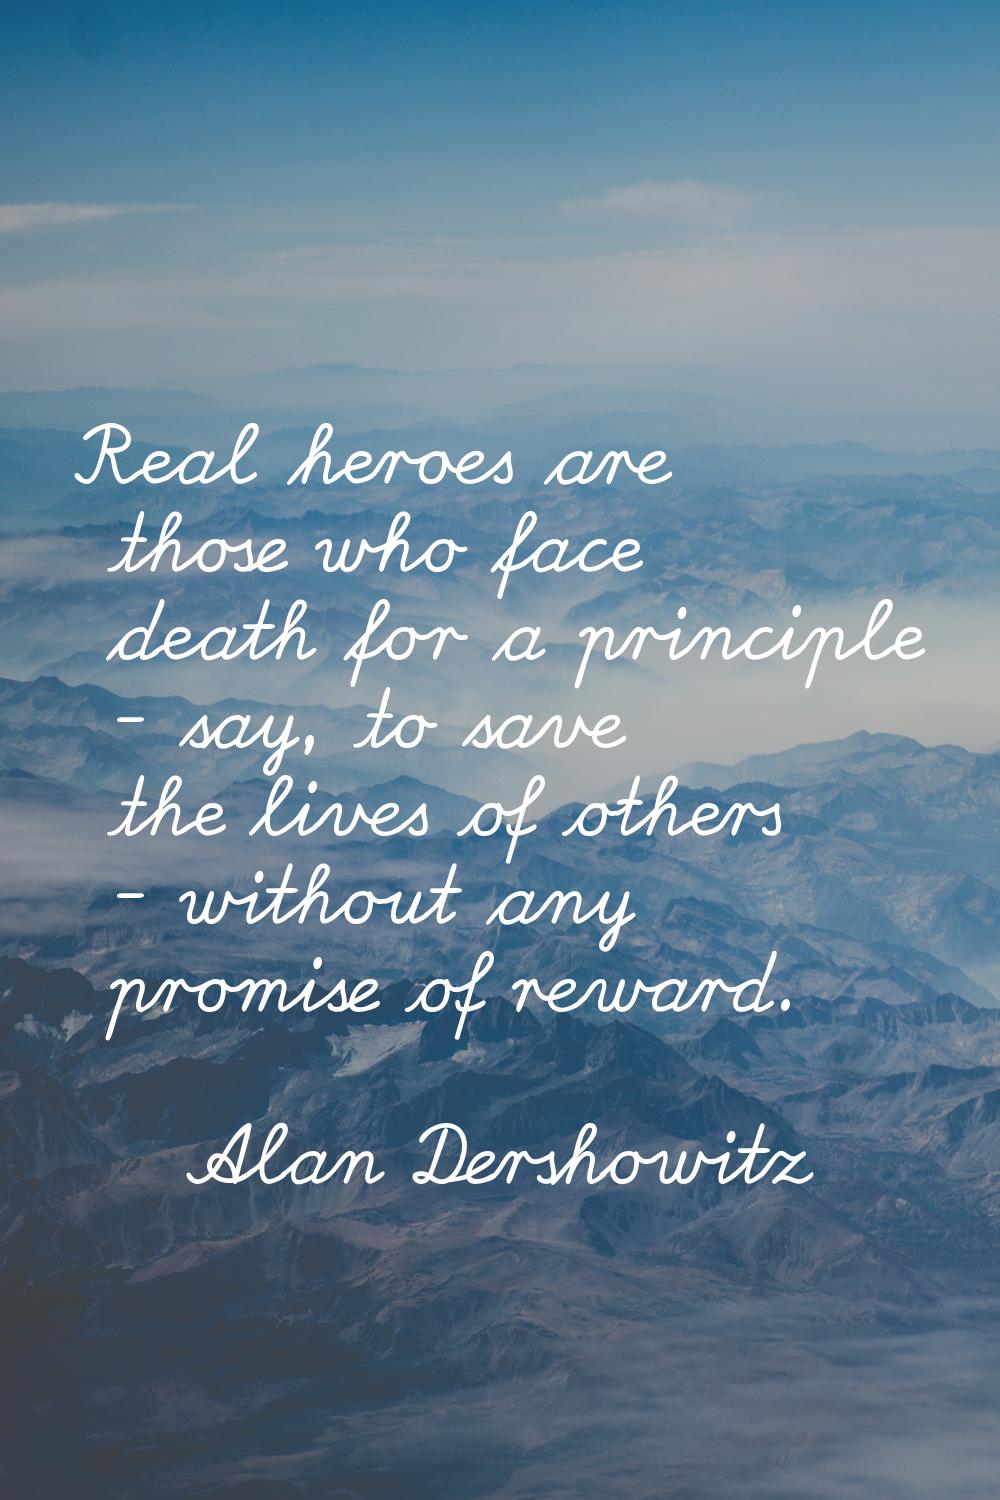 Real heroes are those who face death for a principle - say, to save the lives of others - without a